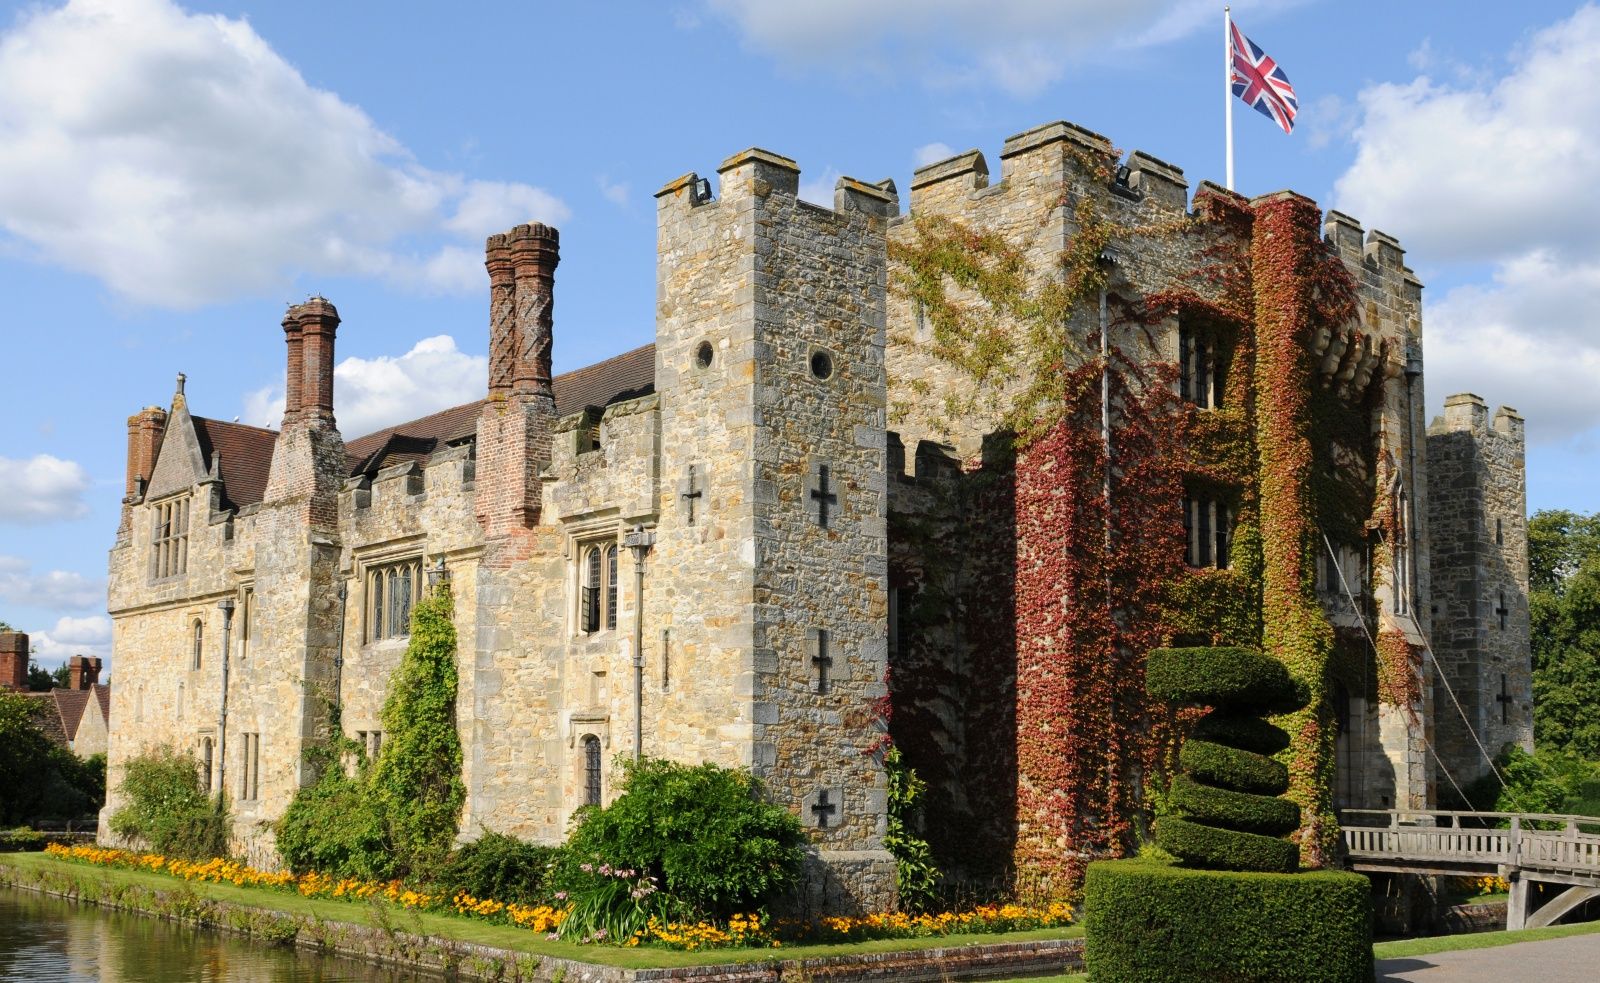 <p>                     <strong>Location: </strong>Kent, TN8 7NG |<strong> Website:</strong> hevercastle.co.uk                   </p>                                      <p>                     Set within 125 acres of Kent countryside, Hever ticks all the ‘fairytale castle’ boxes—and it's a great place for a UK staycation too.                   </p>                                      <p>                     The 13th-century building is surrounded by a large medieval moat, with a wooden drawbridge leading to a towering stone gatehouse. The castle was the childhood home of Henry VIII’s second wife, Anne Boleyn, and Tudor tapestries and portraits decorate its grand halls. The gardens feature a 100-year-old yew maze, boating lake, and mock Tudor village. Guests can stay overnight in a luxurious 5-star B&B within the castle grounds.                    </p>